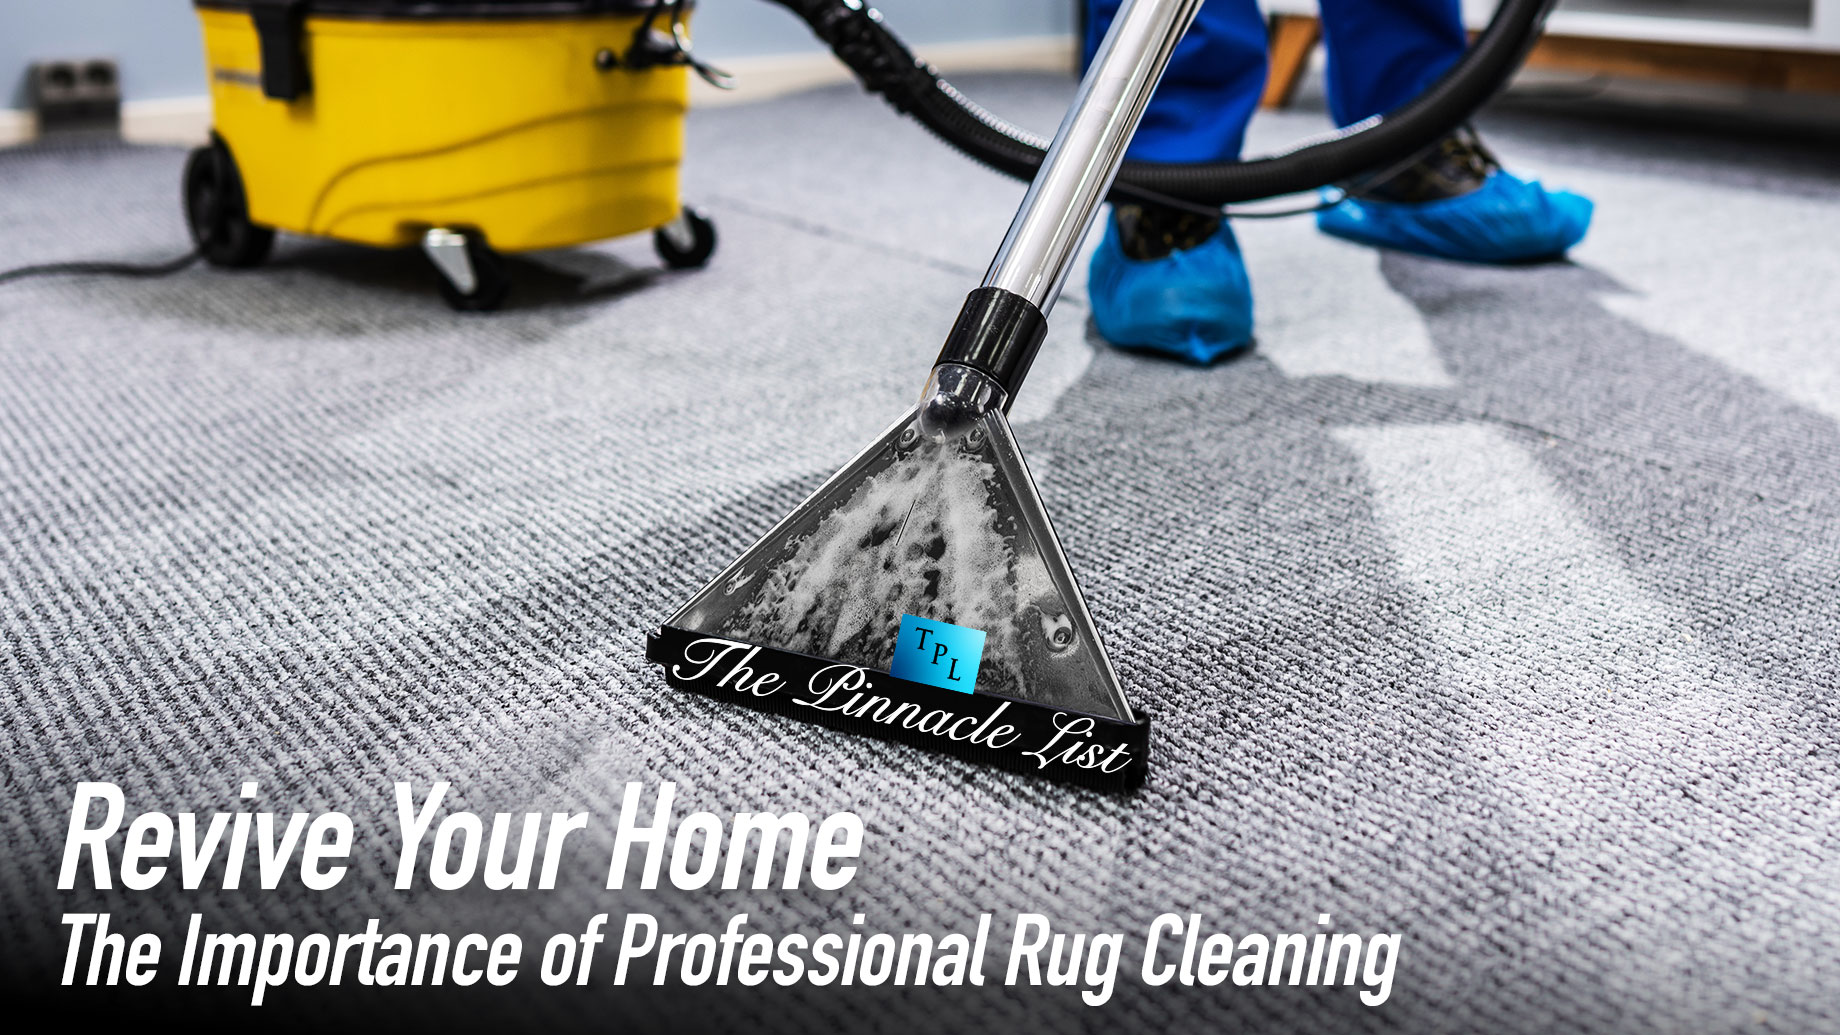 Revive Your Home: The Importance of Professional Rug Cleaning